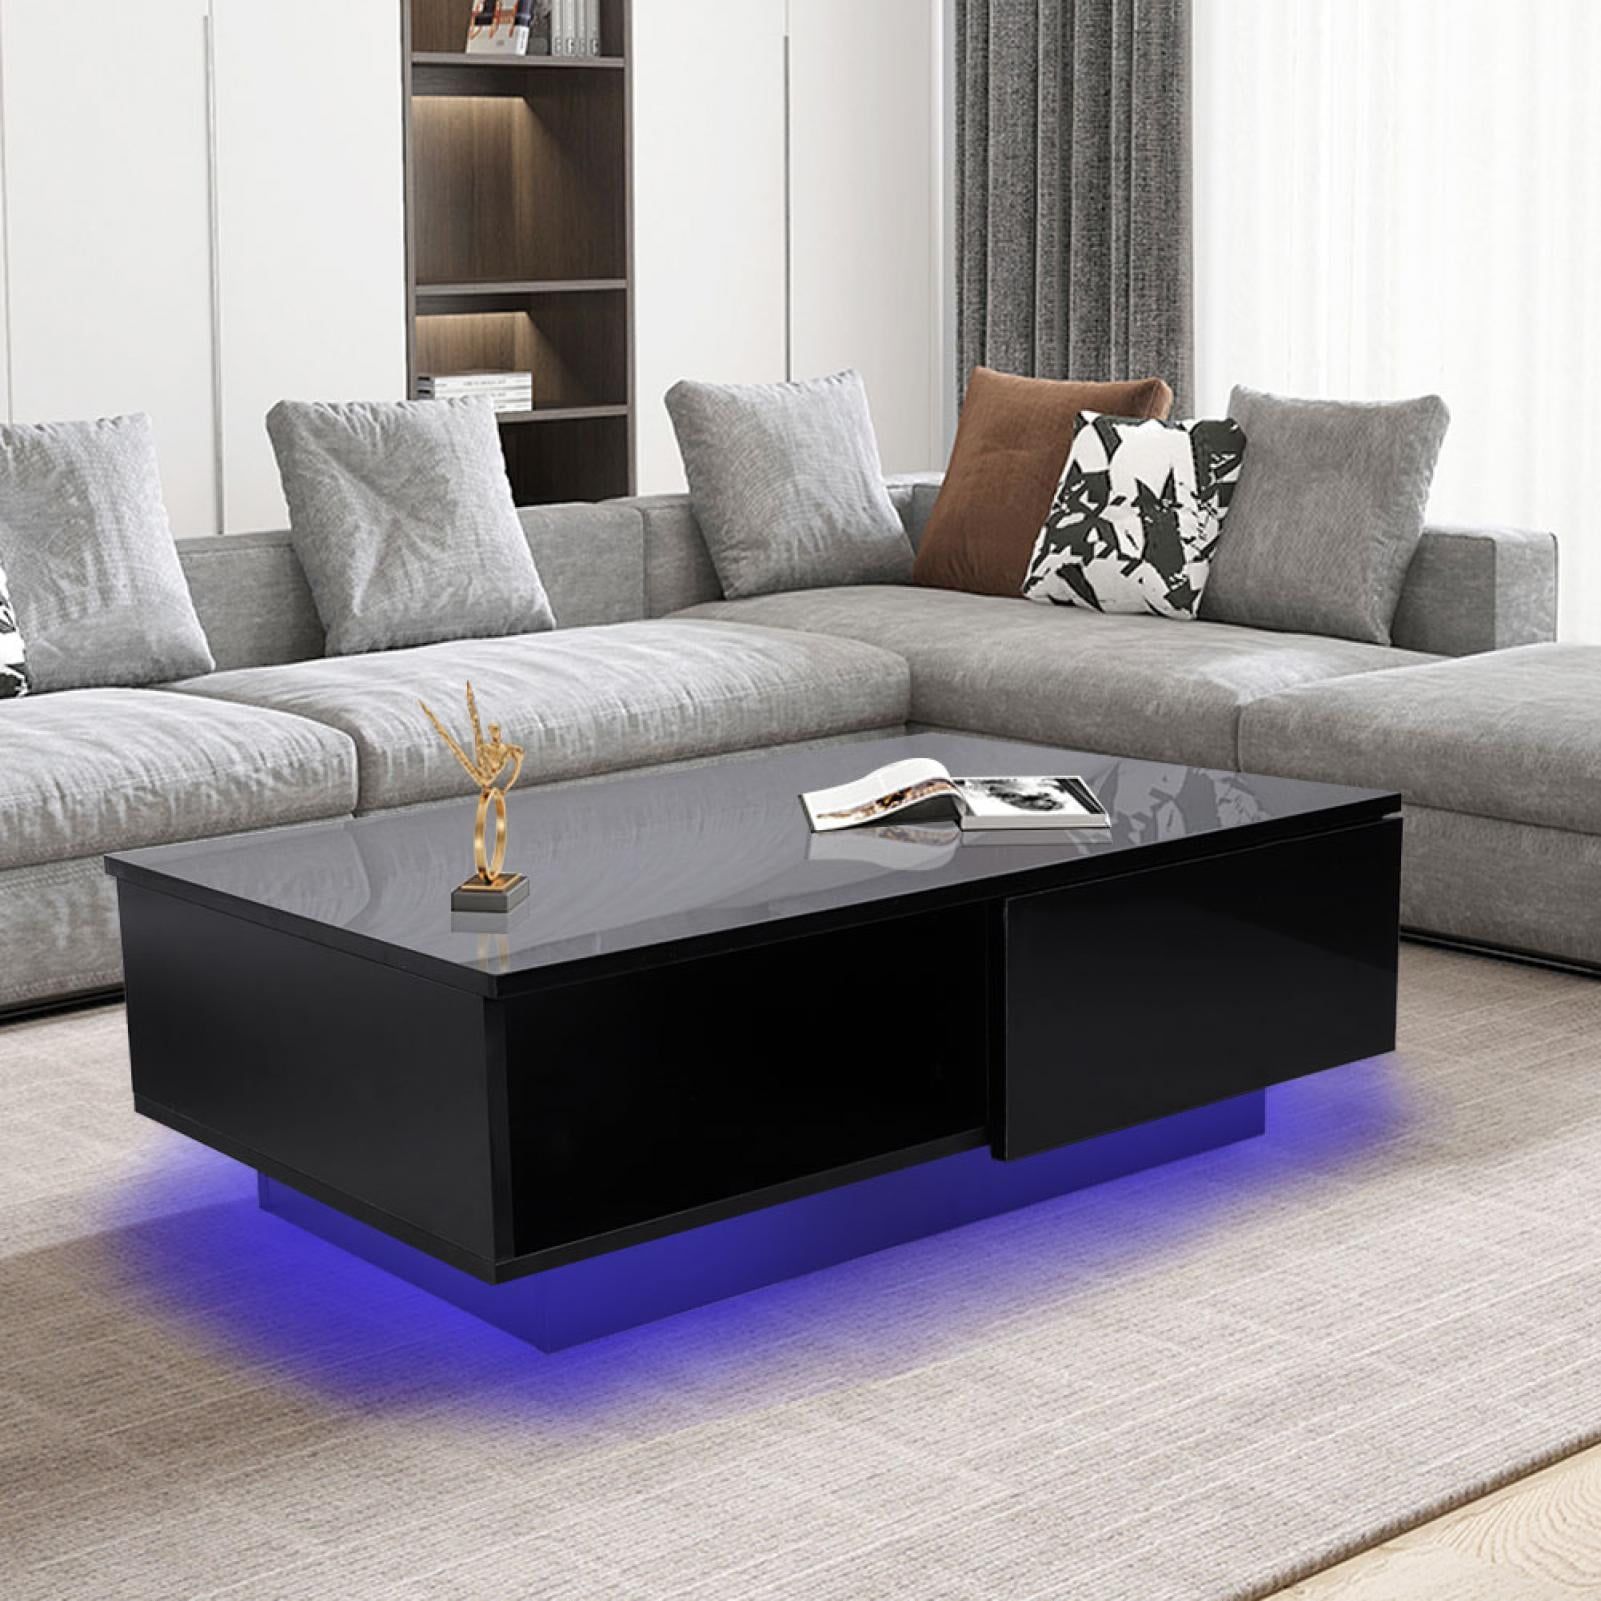 Ebtools Rectangle Led Coffee Table, Black Modern High Gloss Furniture Pertaining To Led Coffee Tables With 4 Drawers (Gallery 10 of 20)